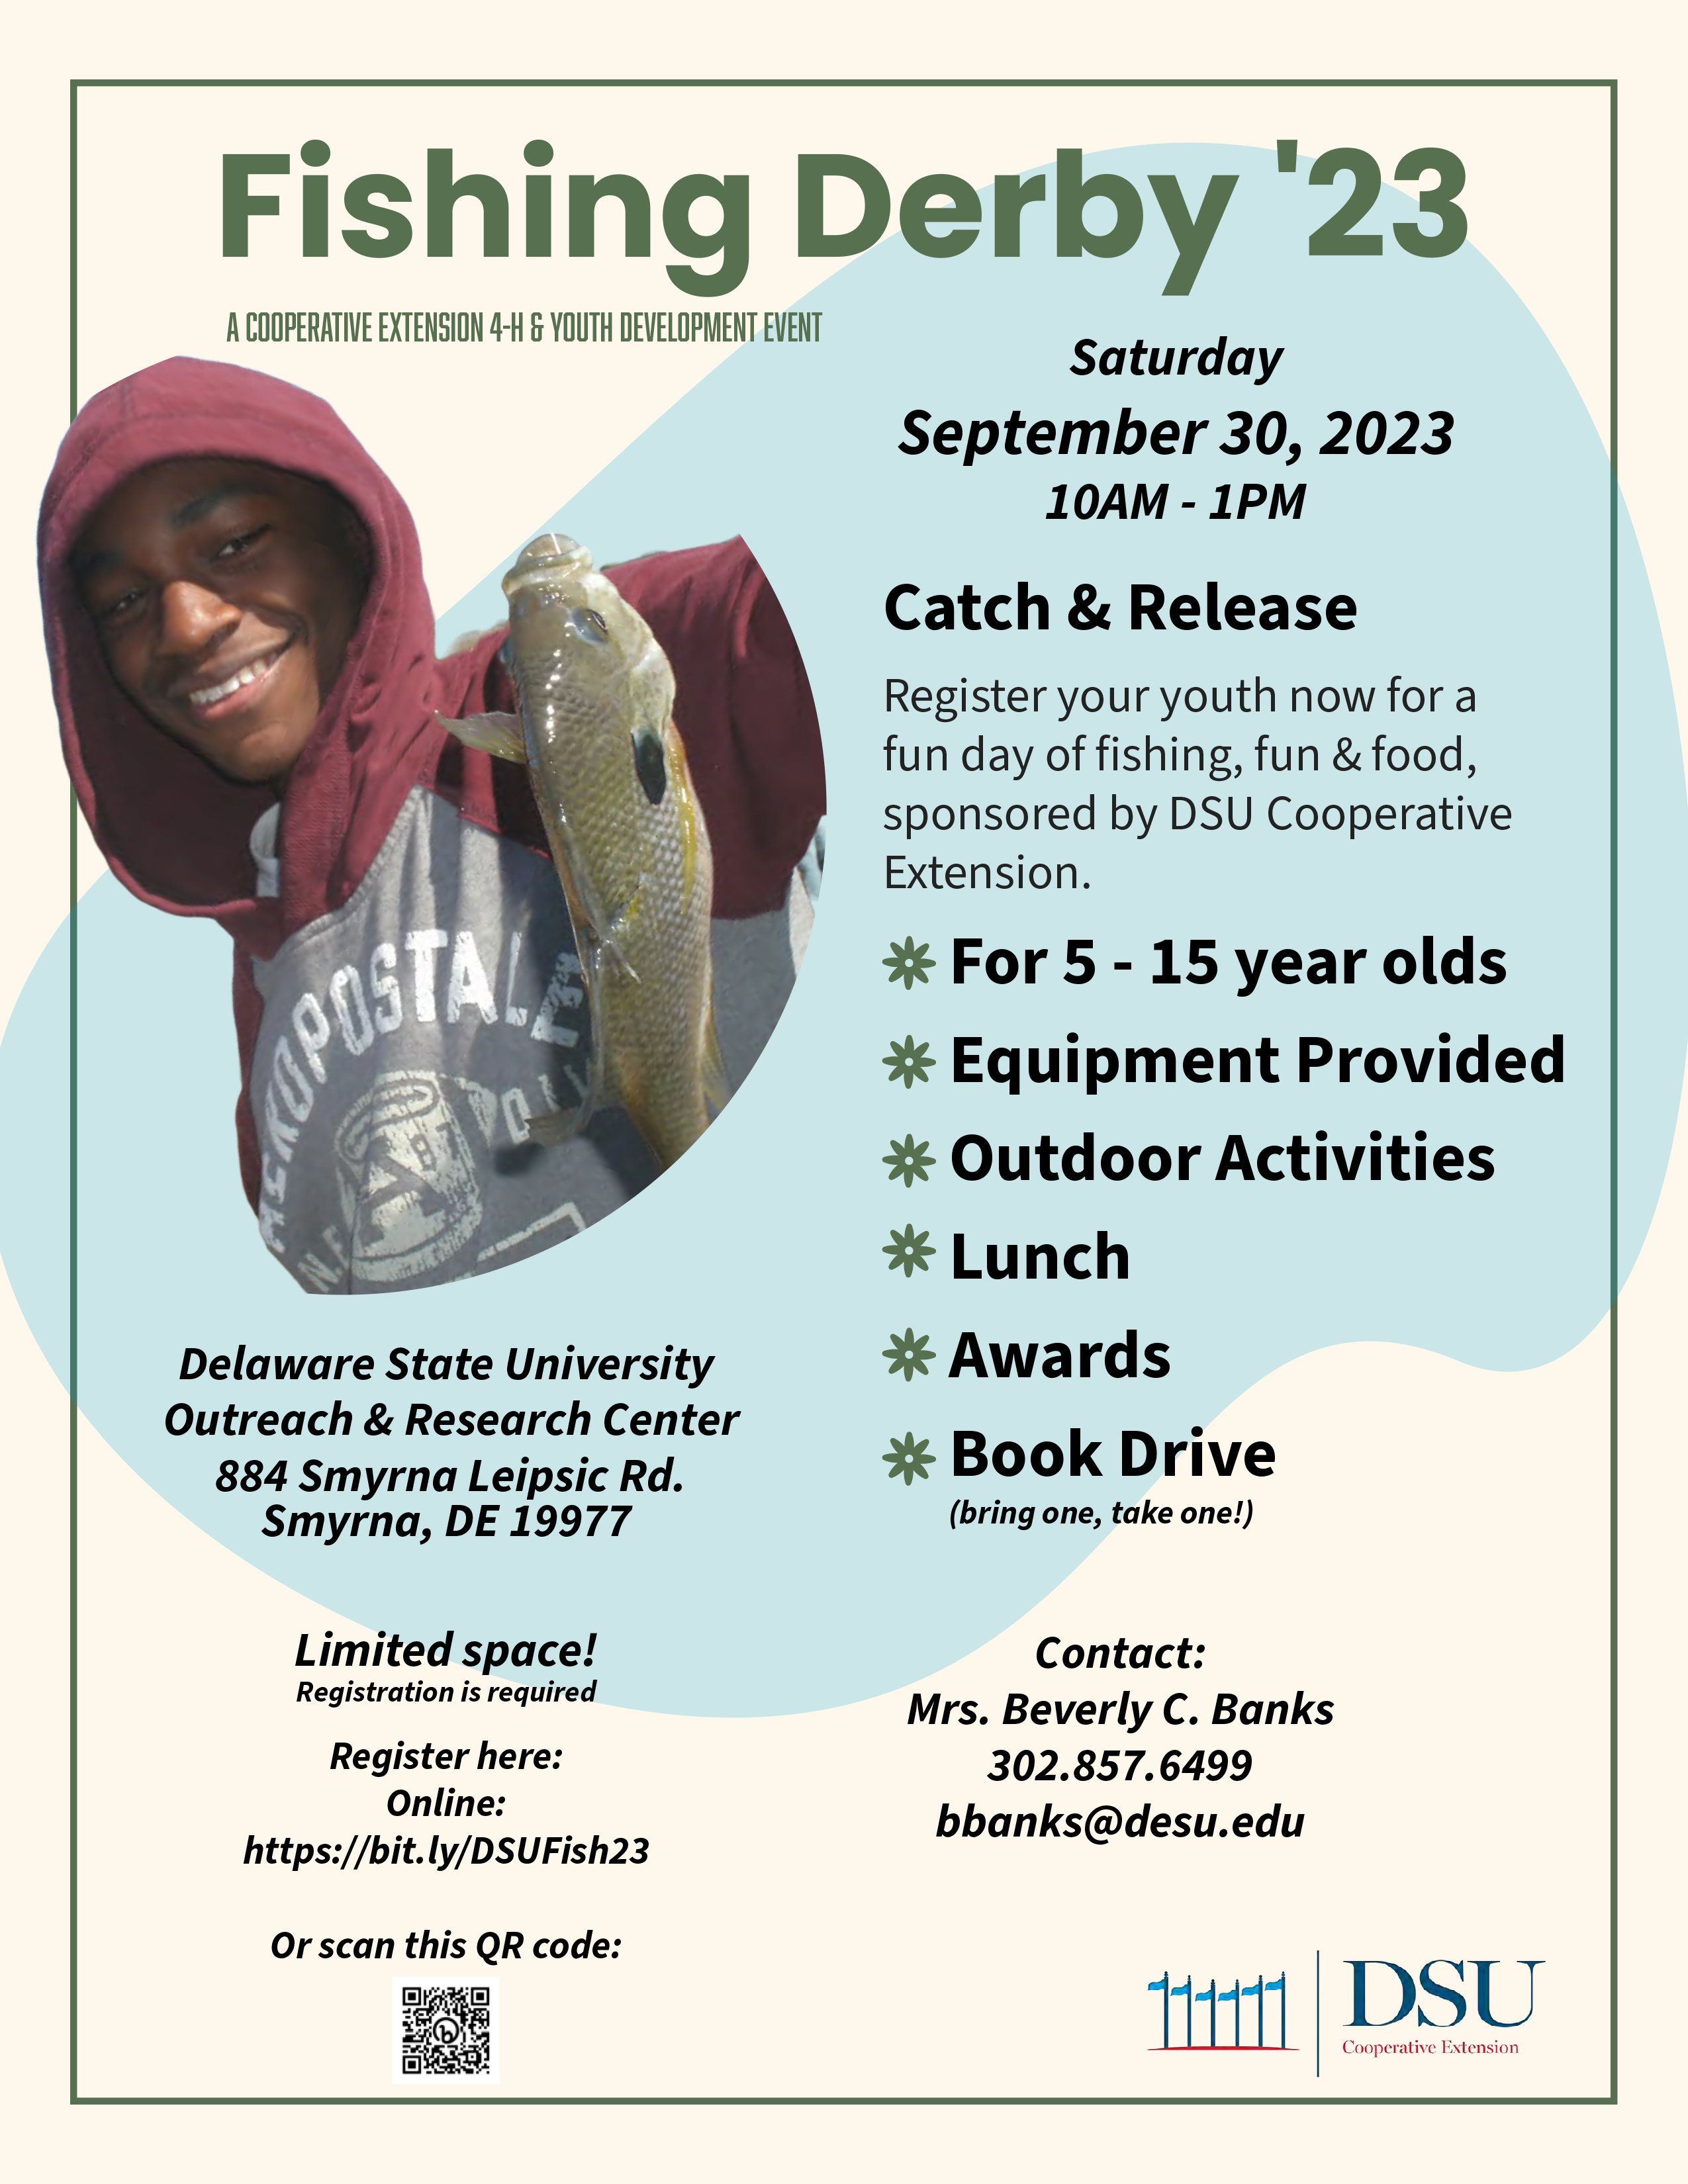 It's time for another Fishing Derby! Hosted by DSU Cooperative Extension's 4-H and Youth Development mission area. Register your 5 - 15 year olds today!